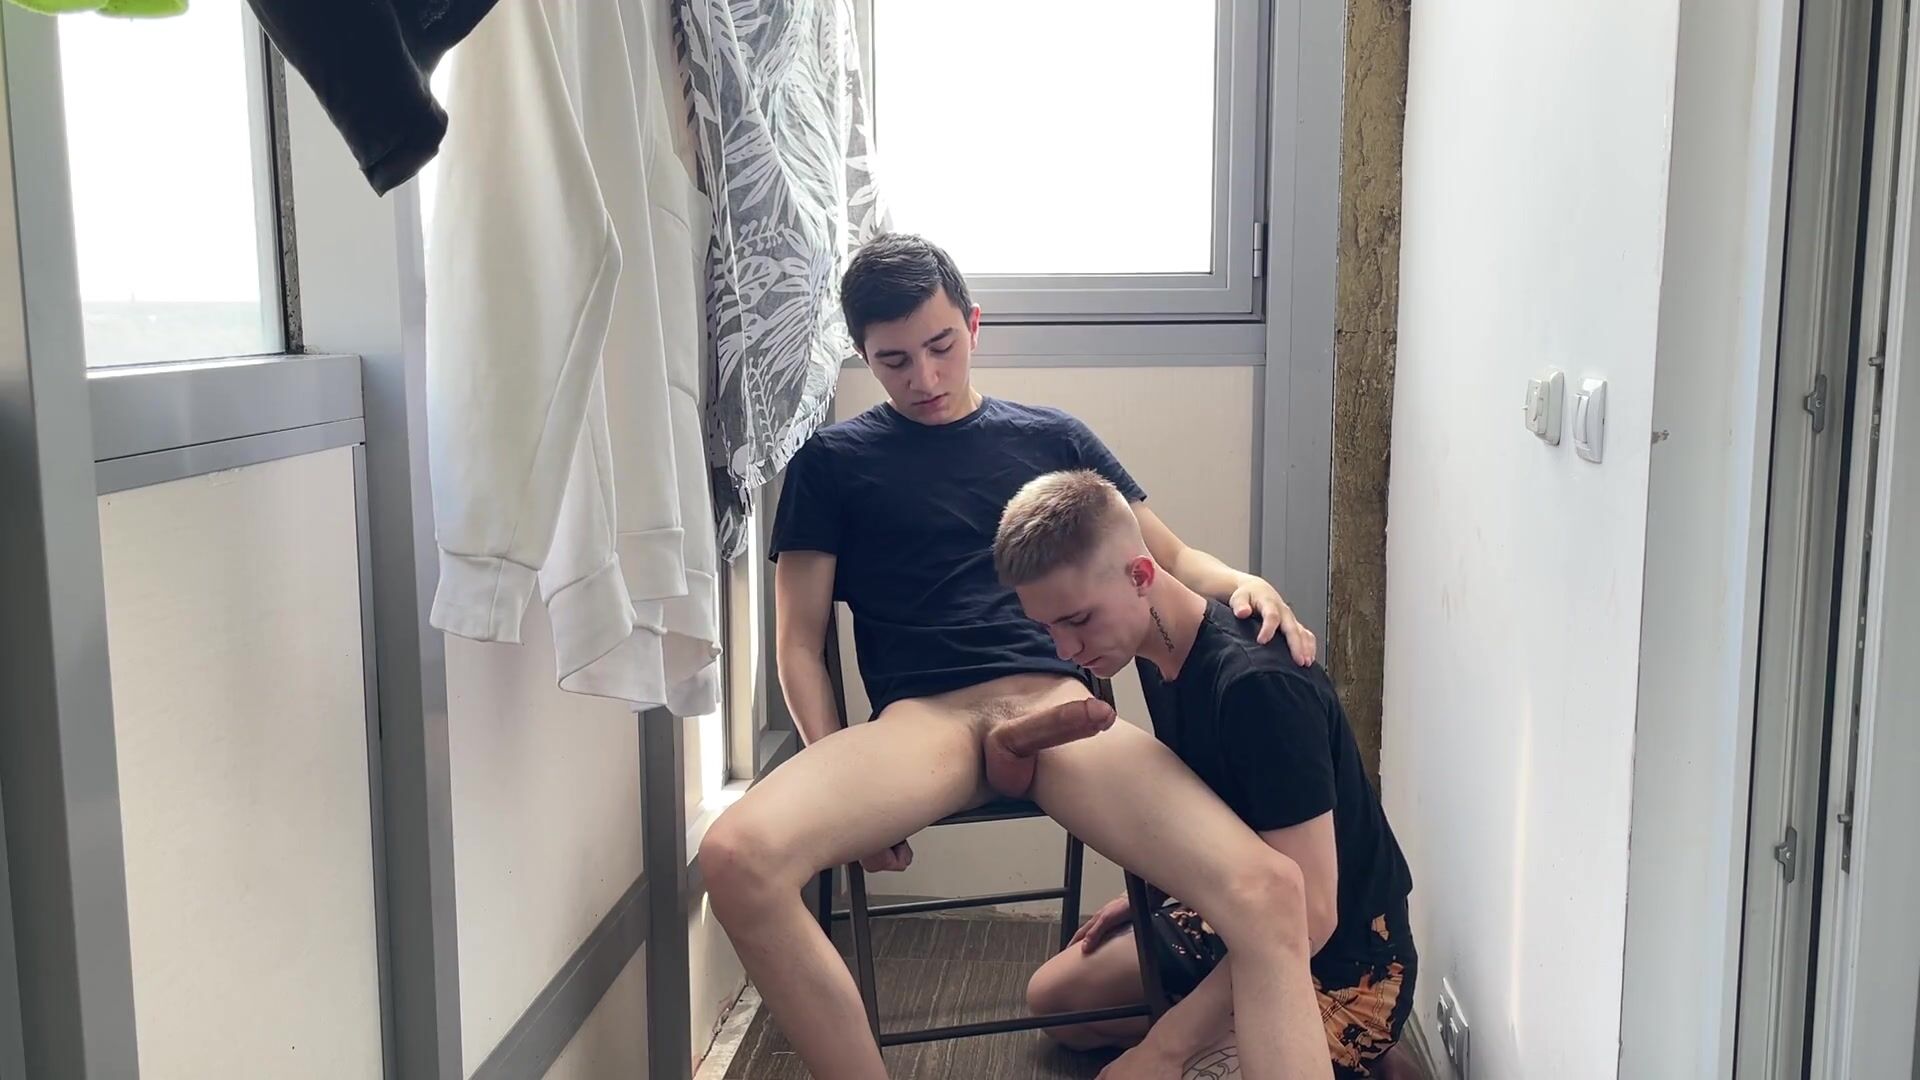 Two inexperienced guys fuck on the balcony watch online